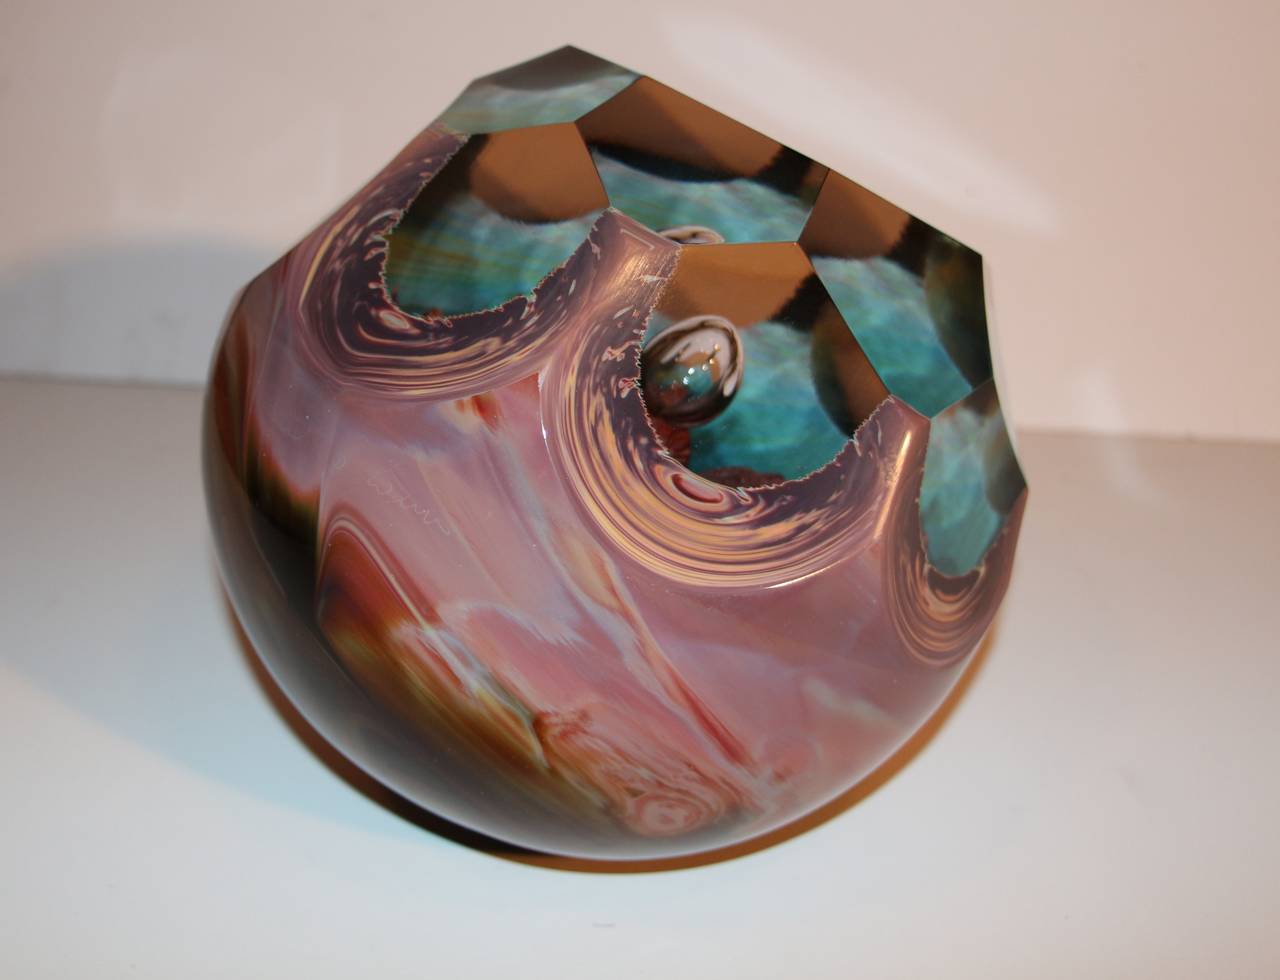 A fabulous Loredano Rosin signed massive and extremely heavy sculpture in the form of a paperweight. We have never seen a piece as unusual as this one from Dino Rosin. The chalcedony glass is quite spectacular and difficult to capture properly. I